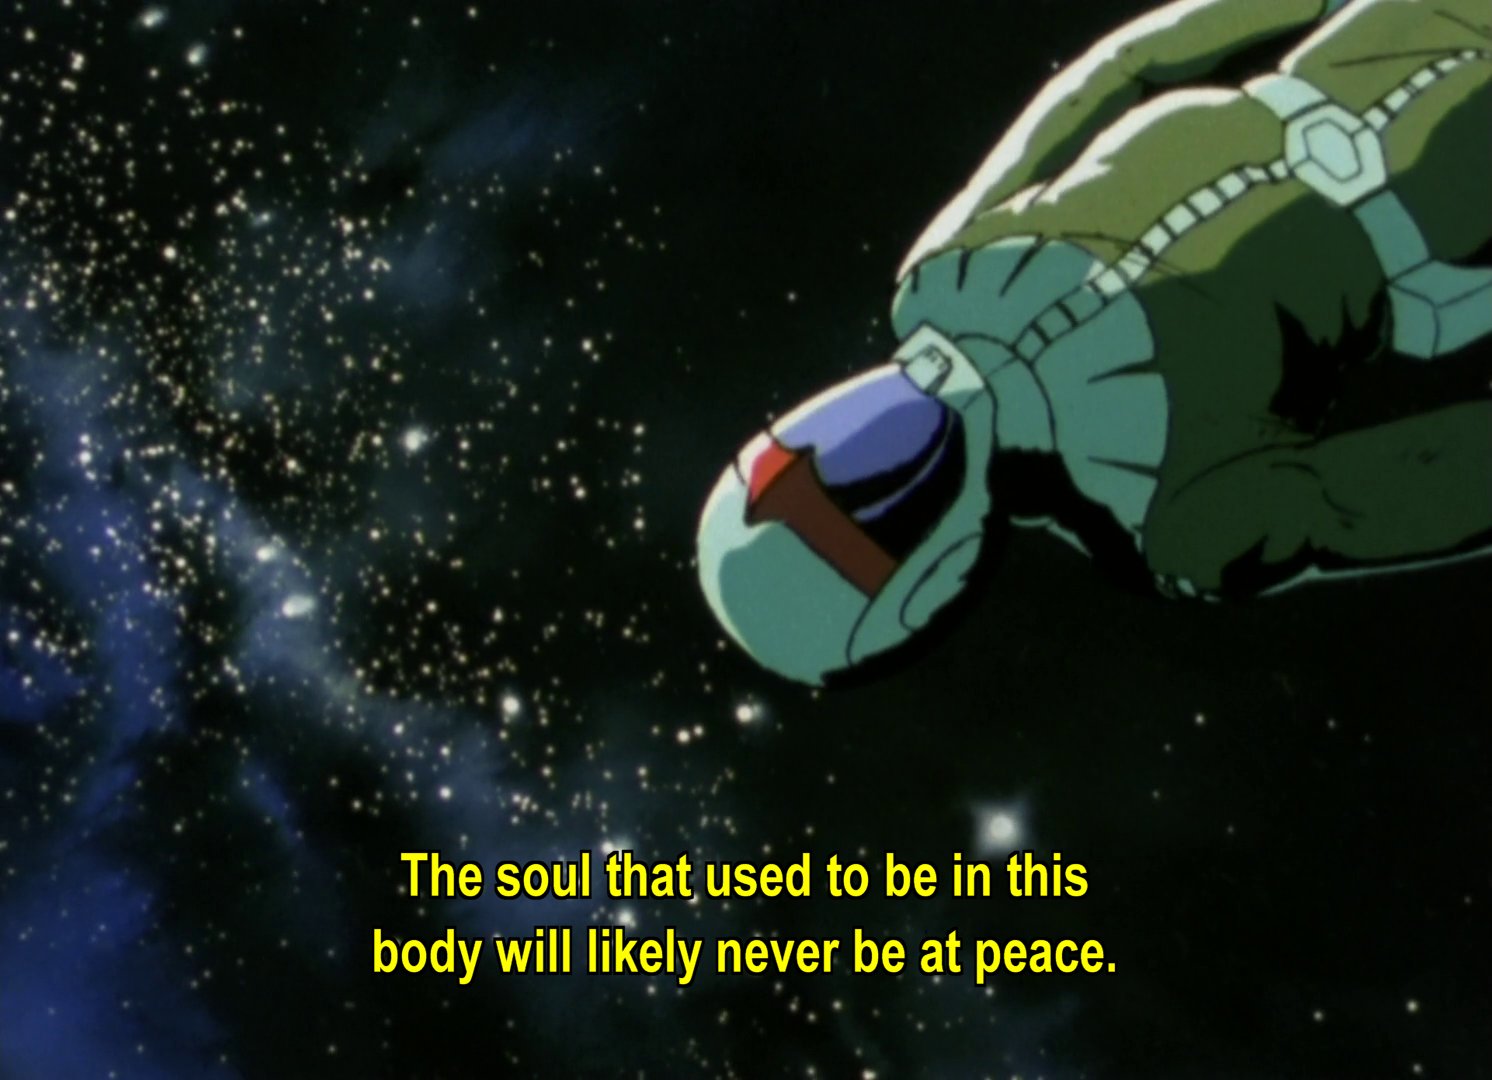 A spacesuit floating through space.  Subtitles: The soul that used to be in this body will likely never be at peace.